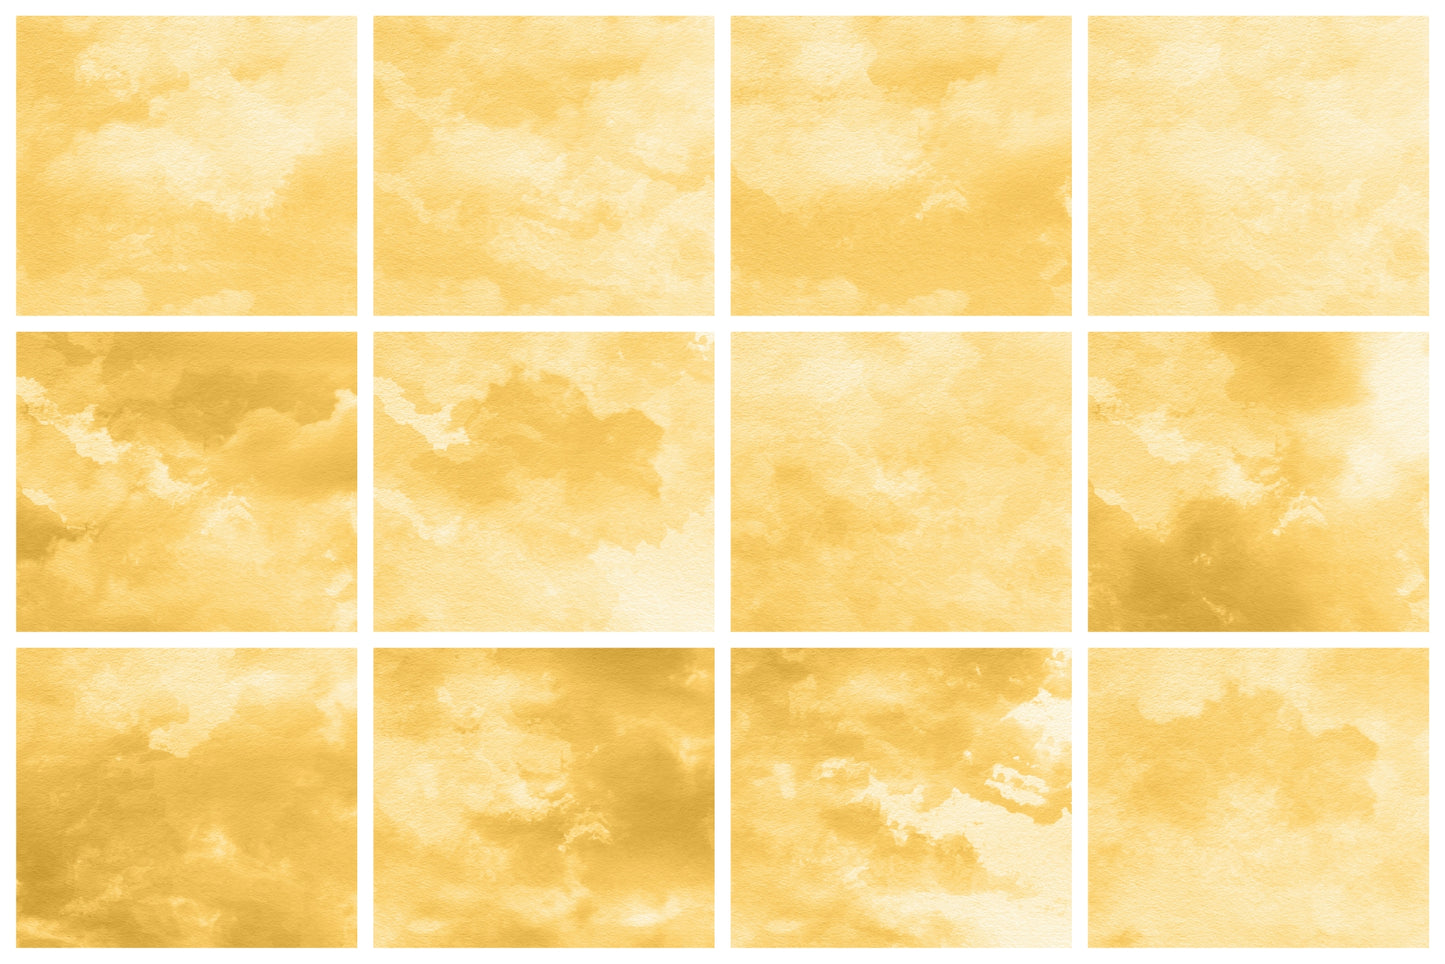 Watercolor Texture Backgrounds 02 Yellow Gold Watercolor Textures